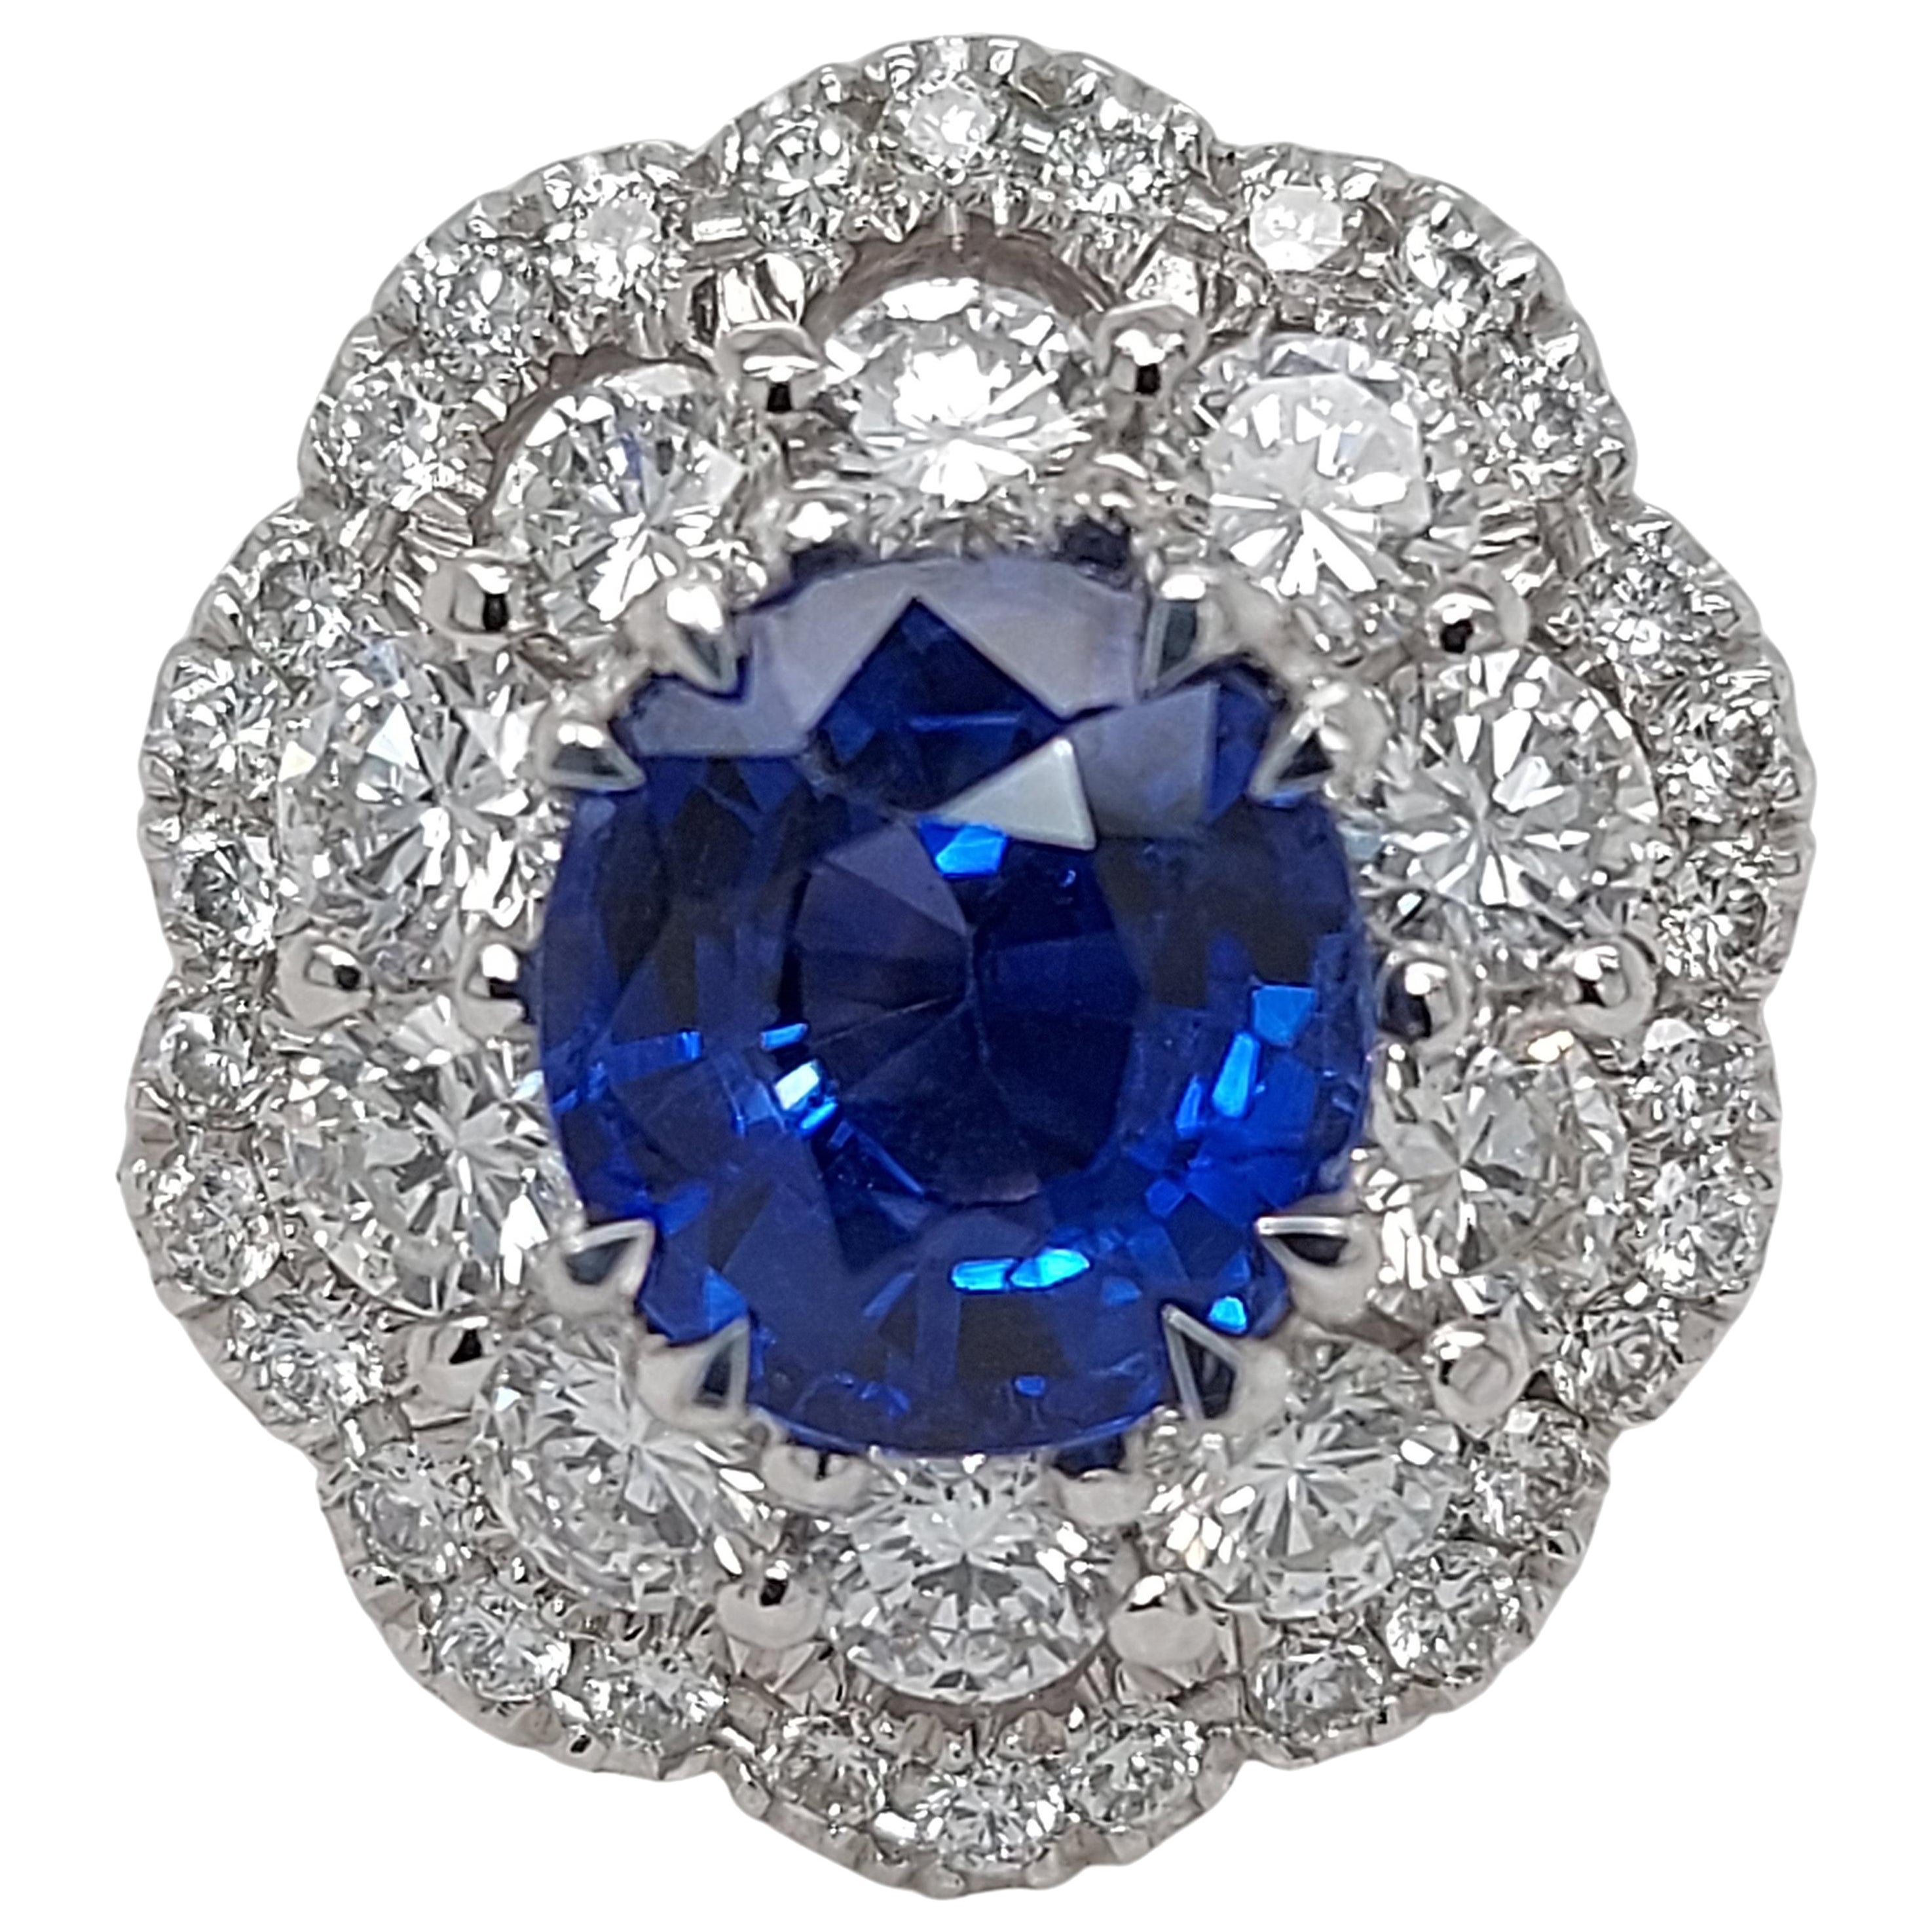 Exceptional 18 Karat Gold Ring with 2.43 Carat Sapphire and 1.36 Carat Diamonds For Sale